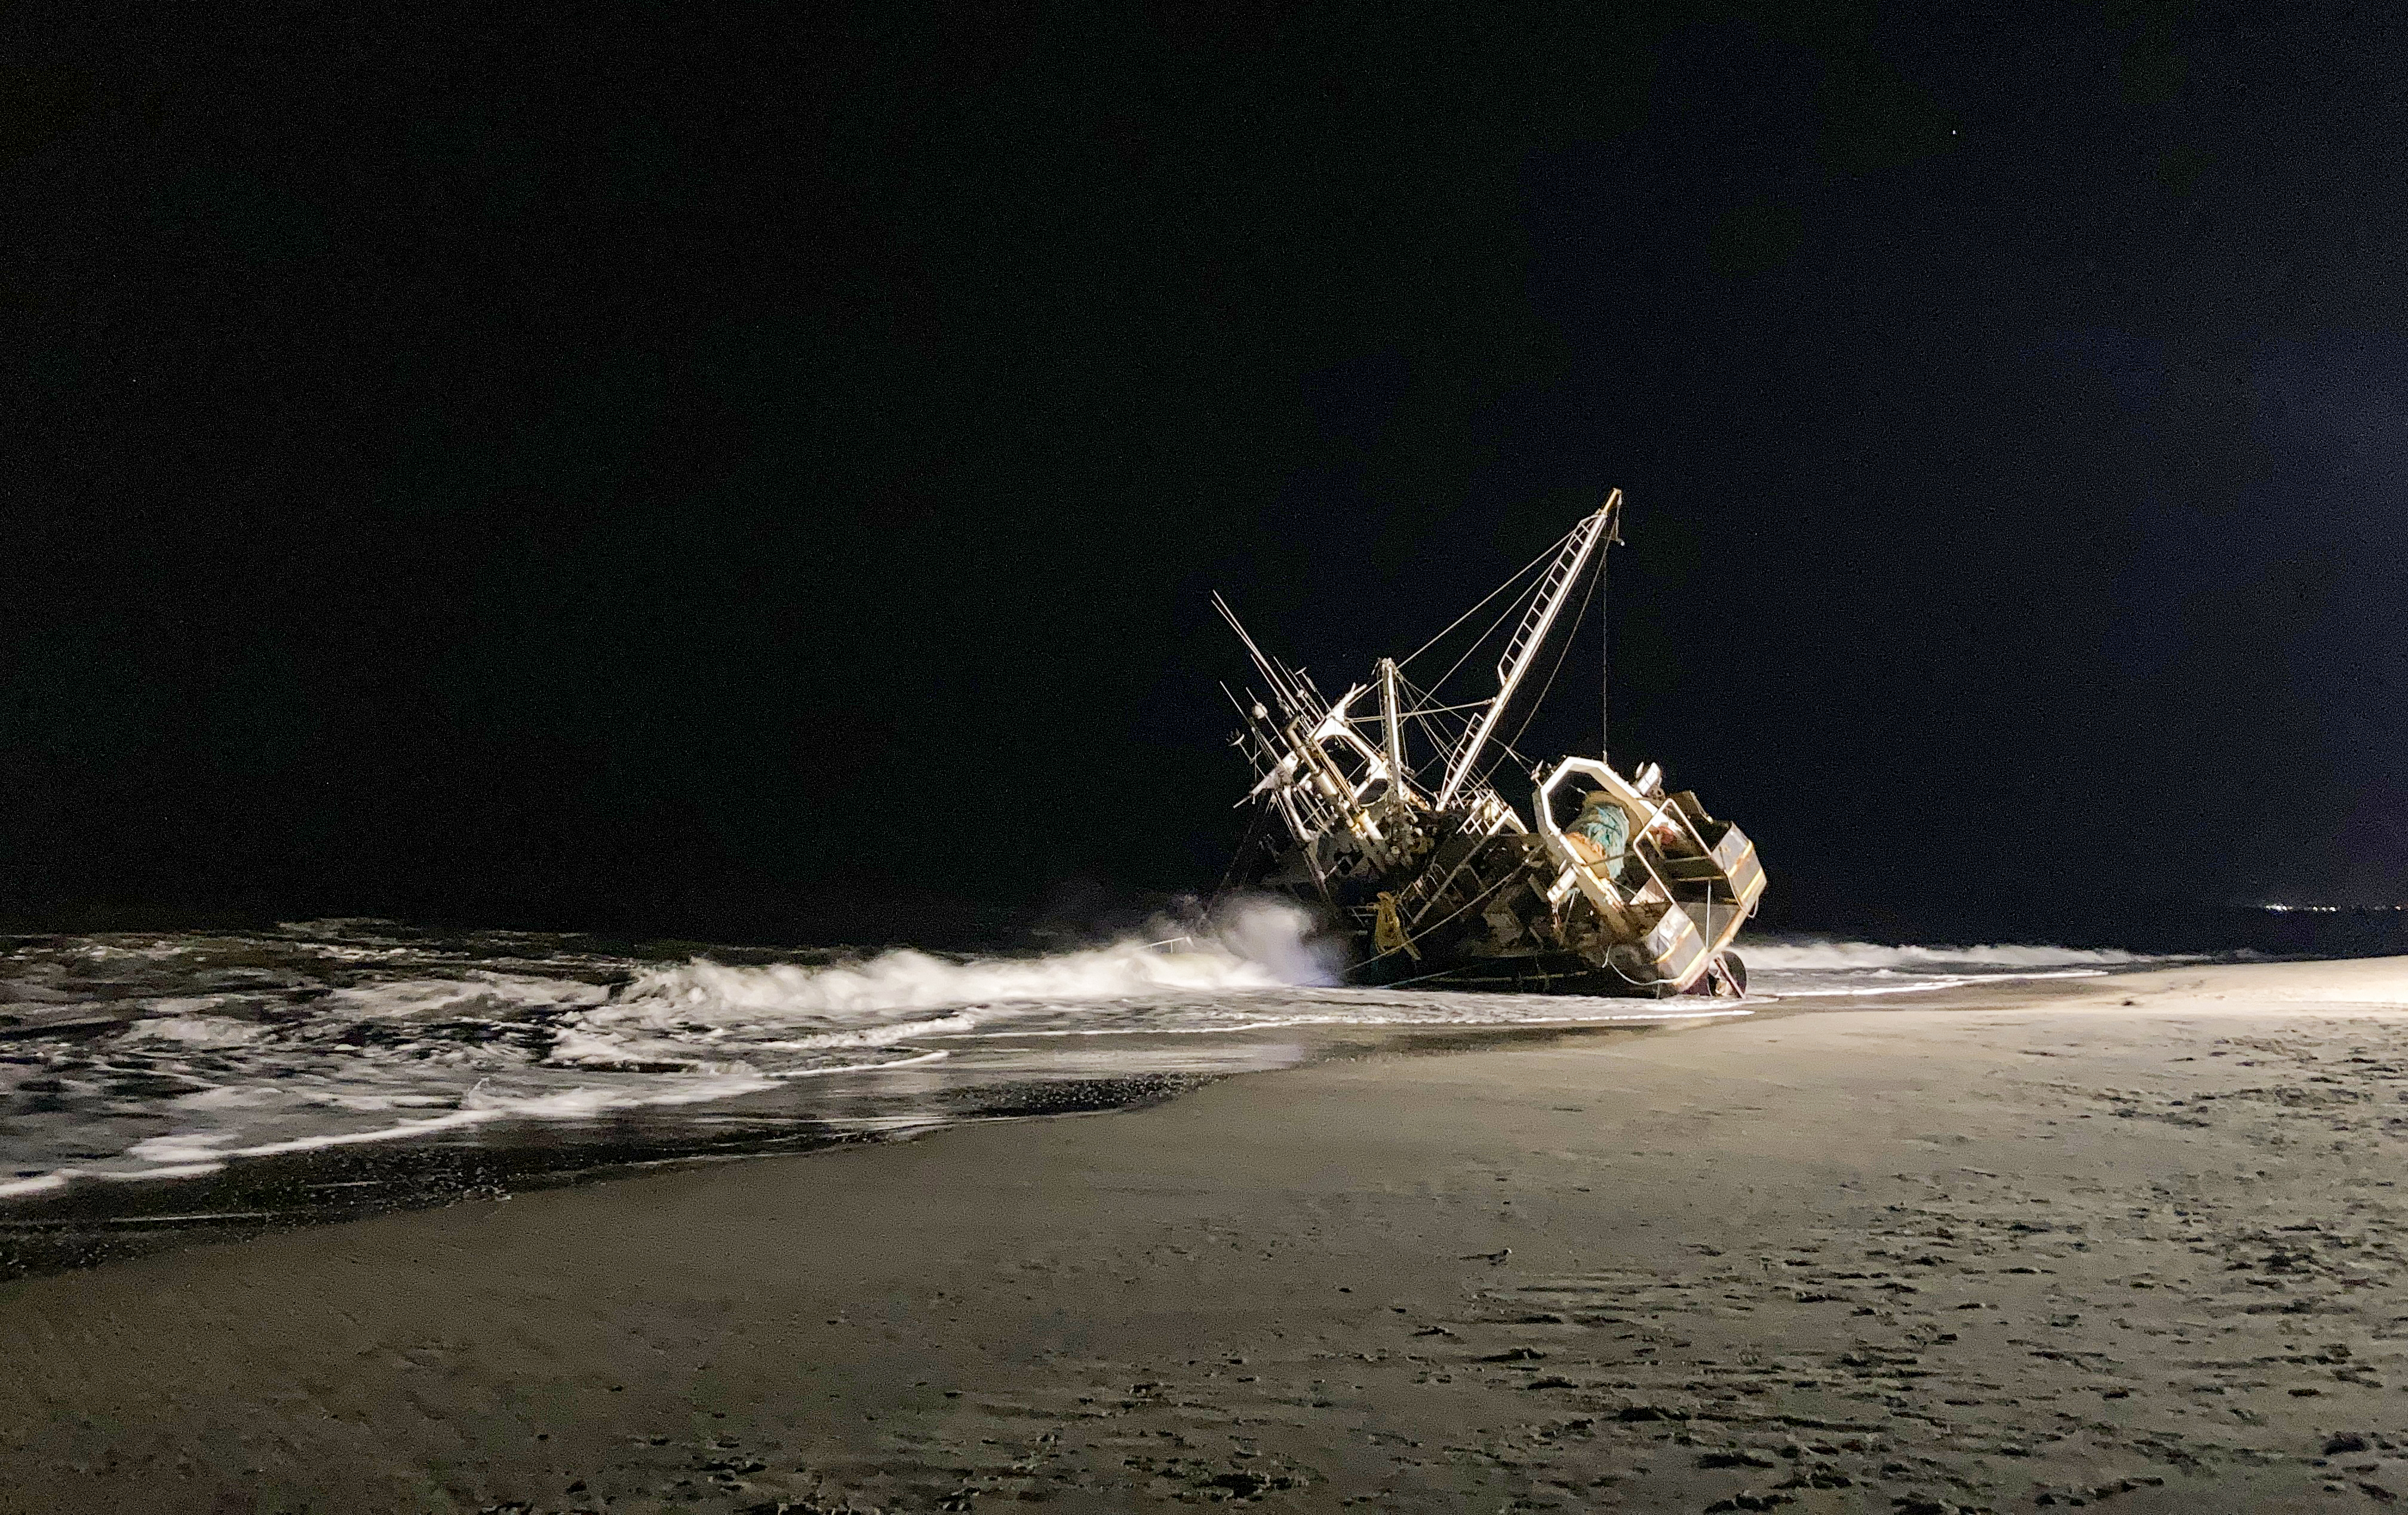 A fishing boat ran aground off New Jersey docks